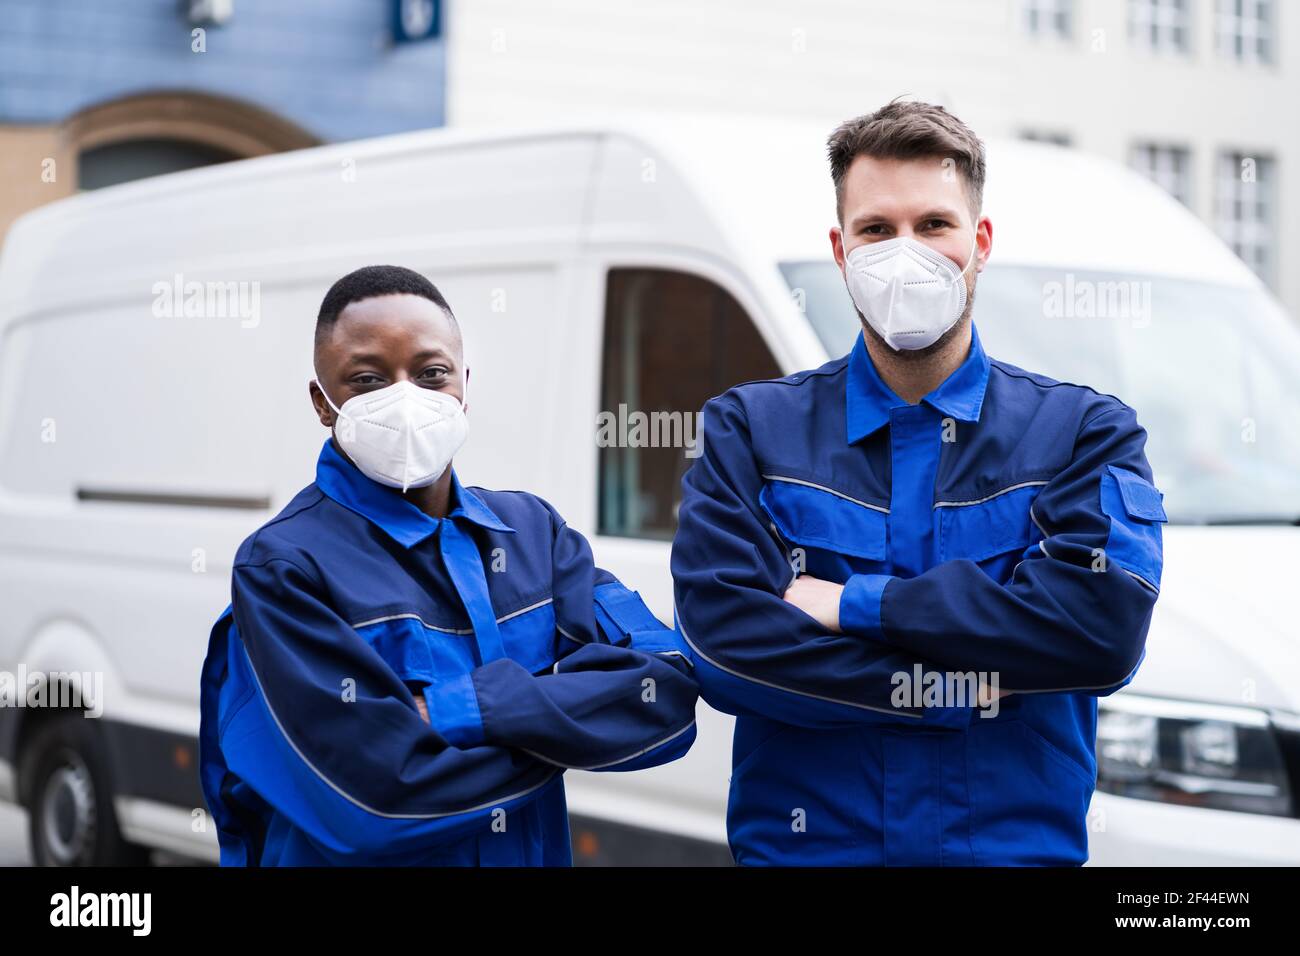 Electrician Technician Or Plumber In Workwear And Face Mask Near Van Stock Photo